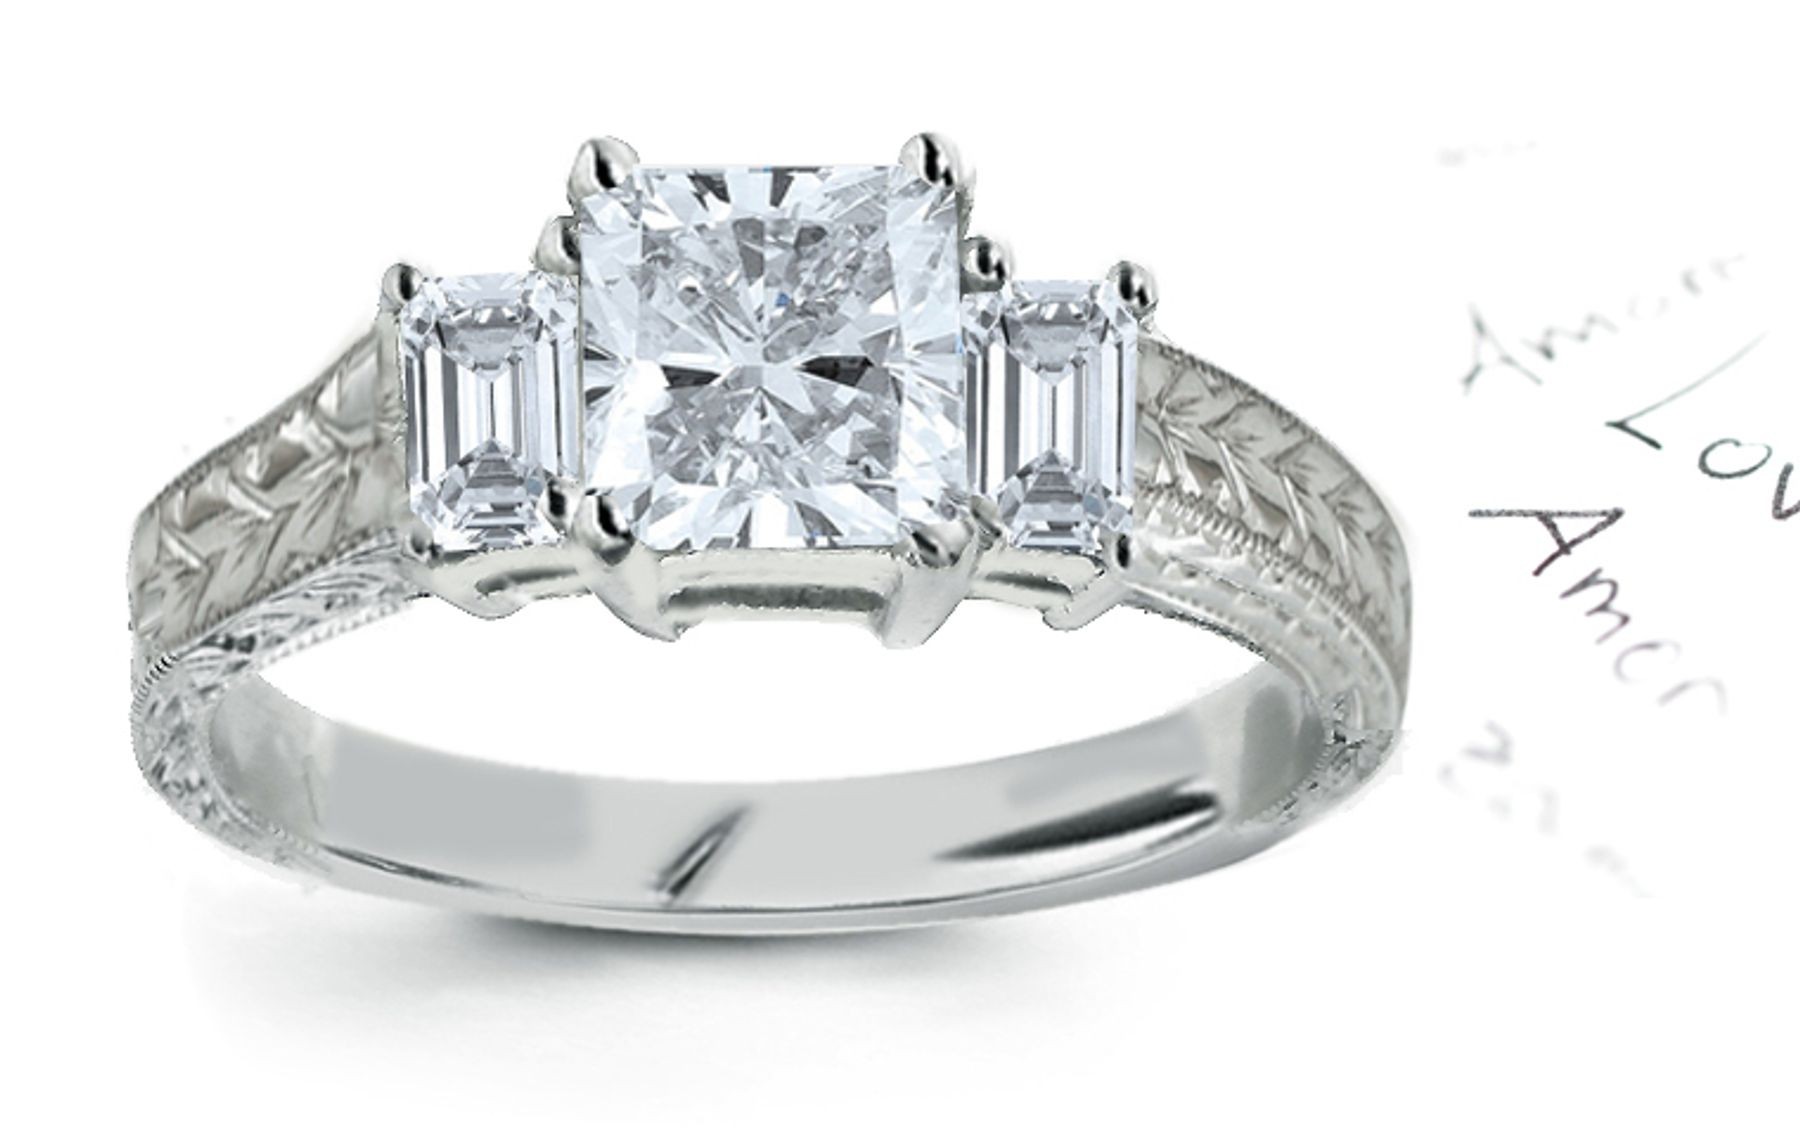 Three Stone Diamond Ring: Three Stone Diamond (Rings with Emerald Cut & Princess Cut Diamonds) Ring in Platinum & 14K White Yellow Gold. 